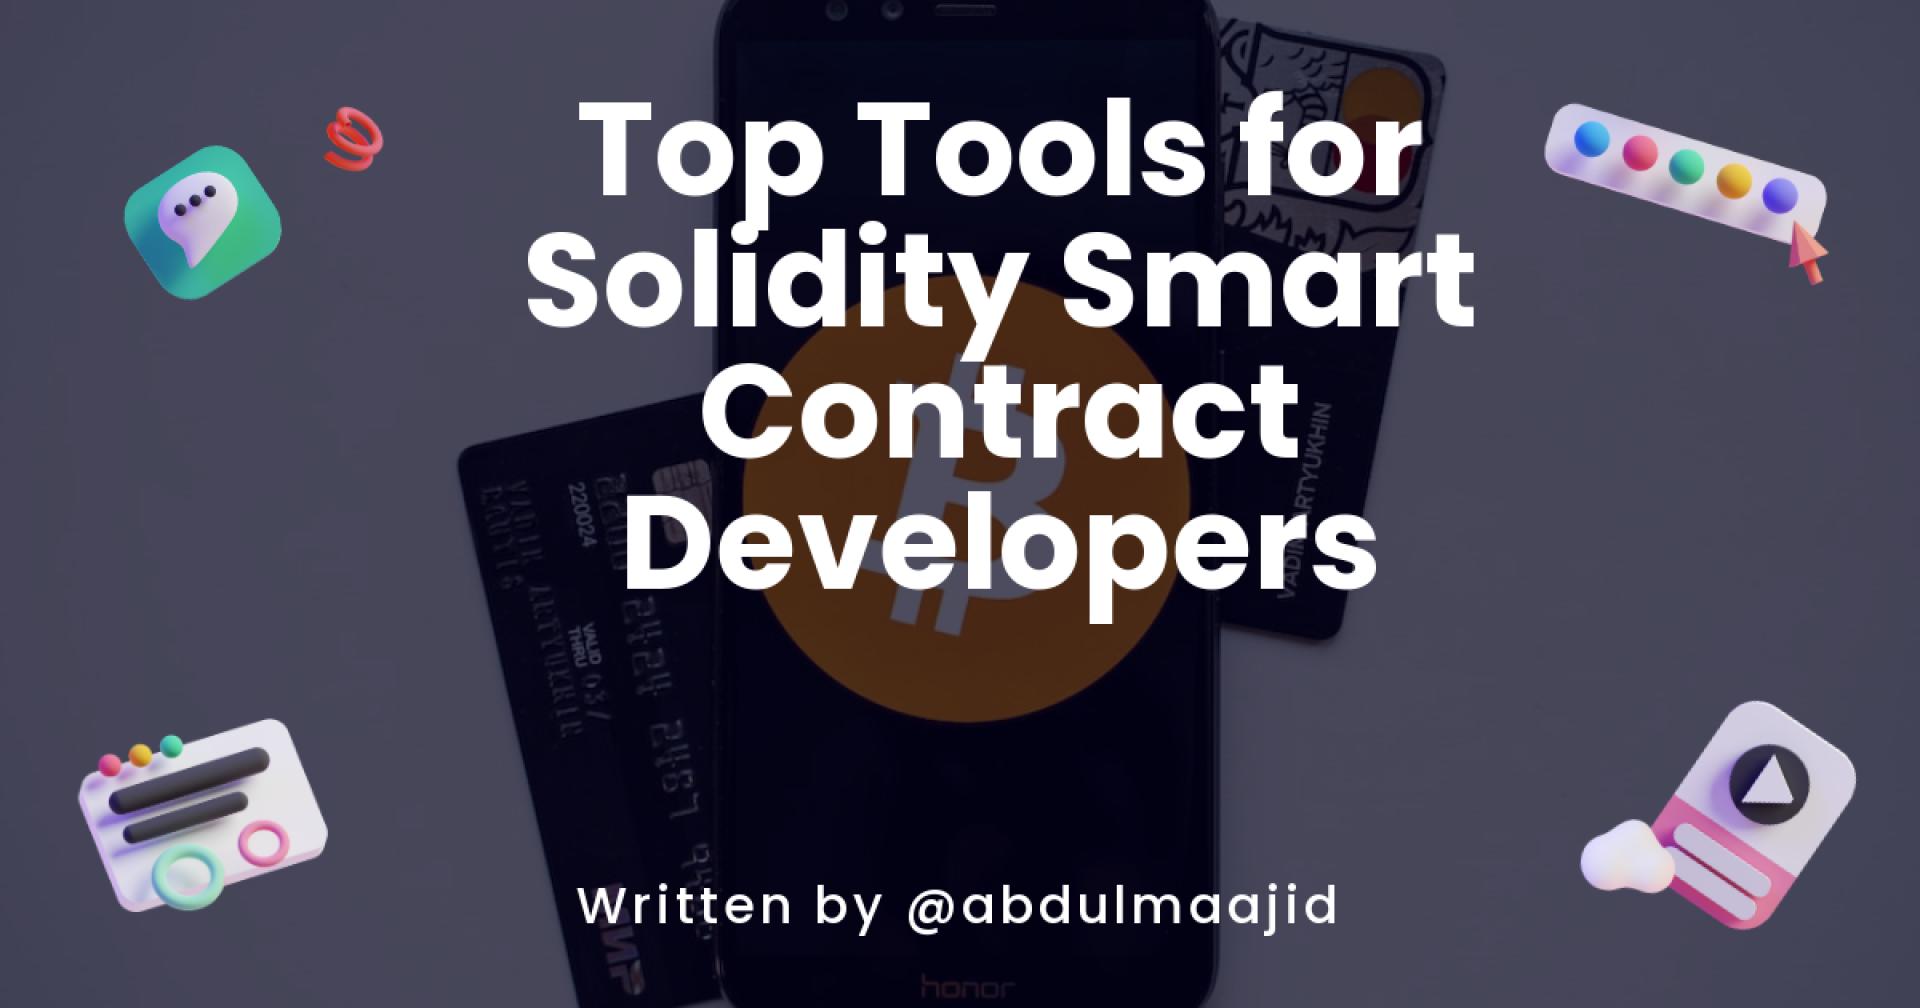 Top Tools for Solidity Smart Contract Developers